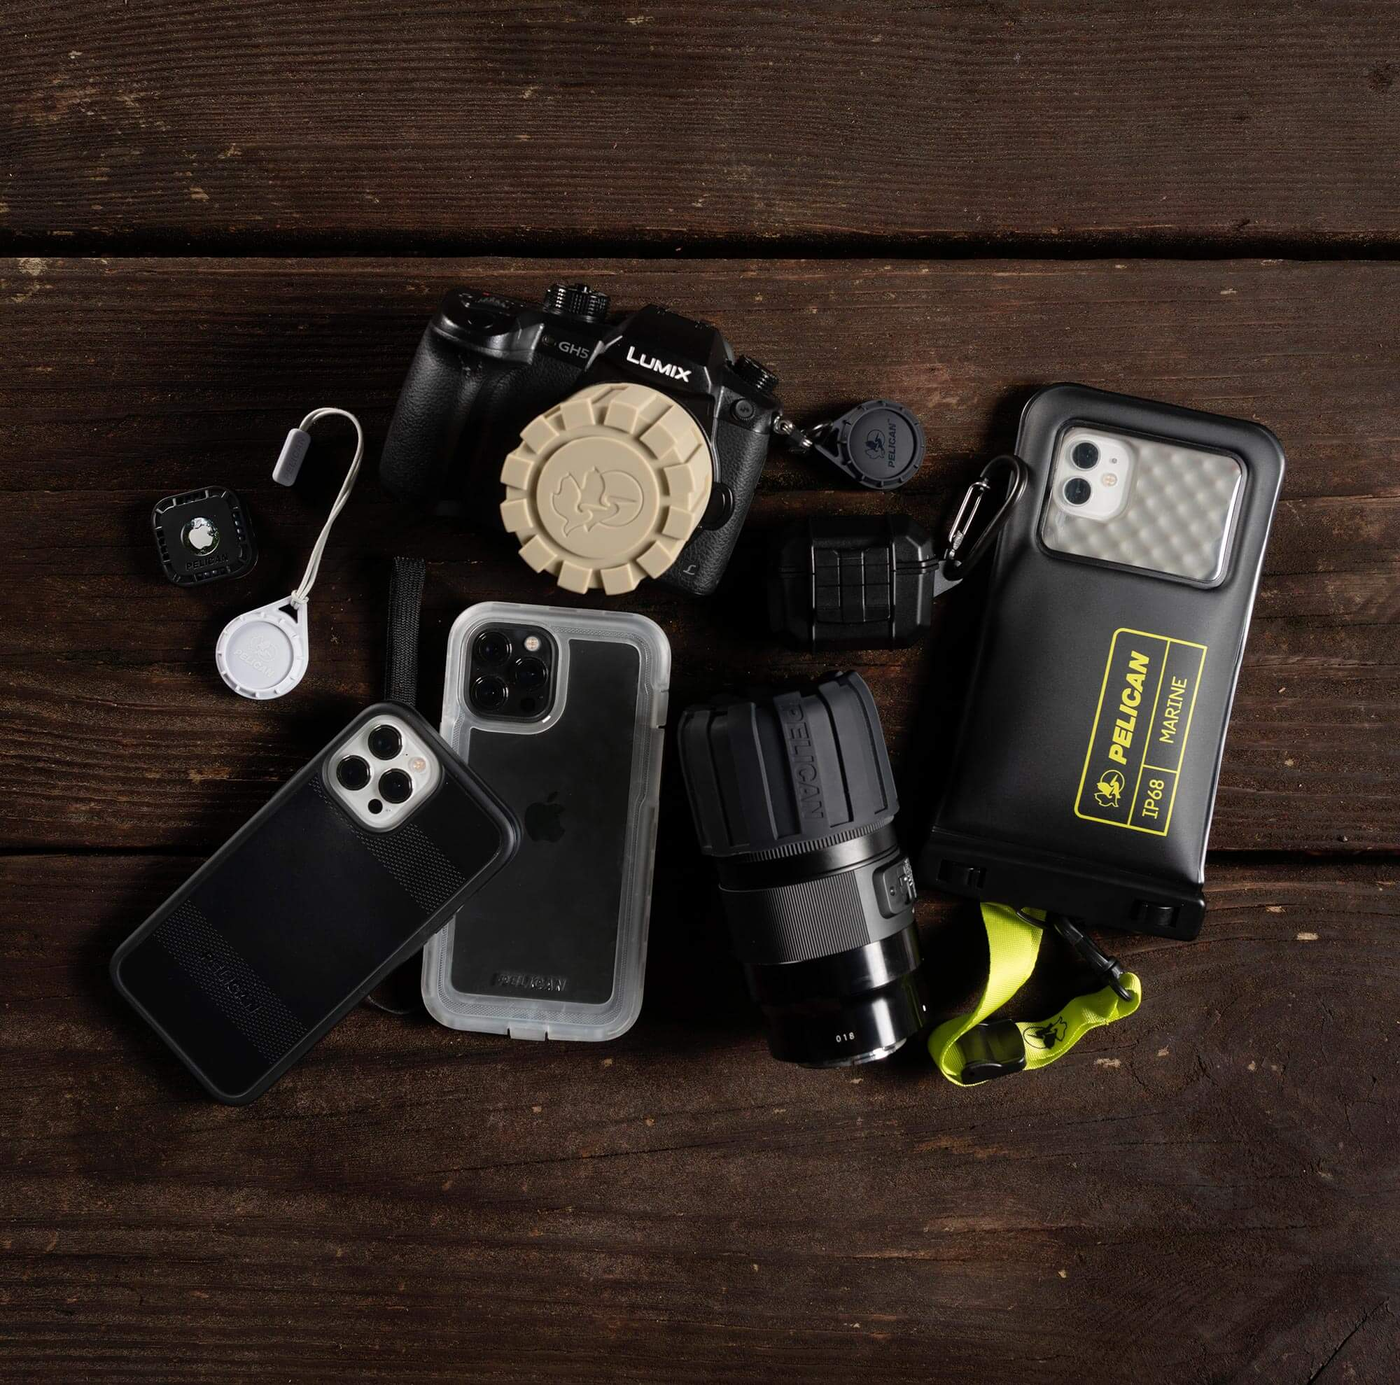 Pelican Outdoor Tech Protection Collection Including Phone Cases, AirPods Cases, and Camera Lens Covers